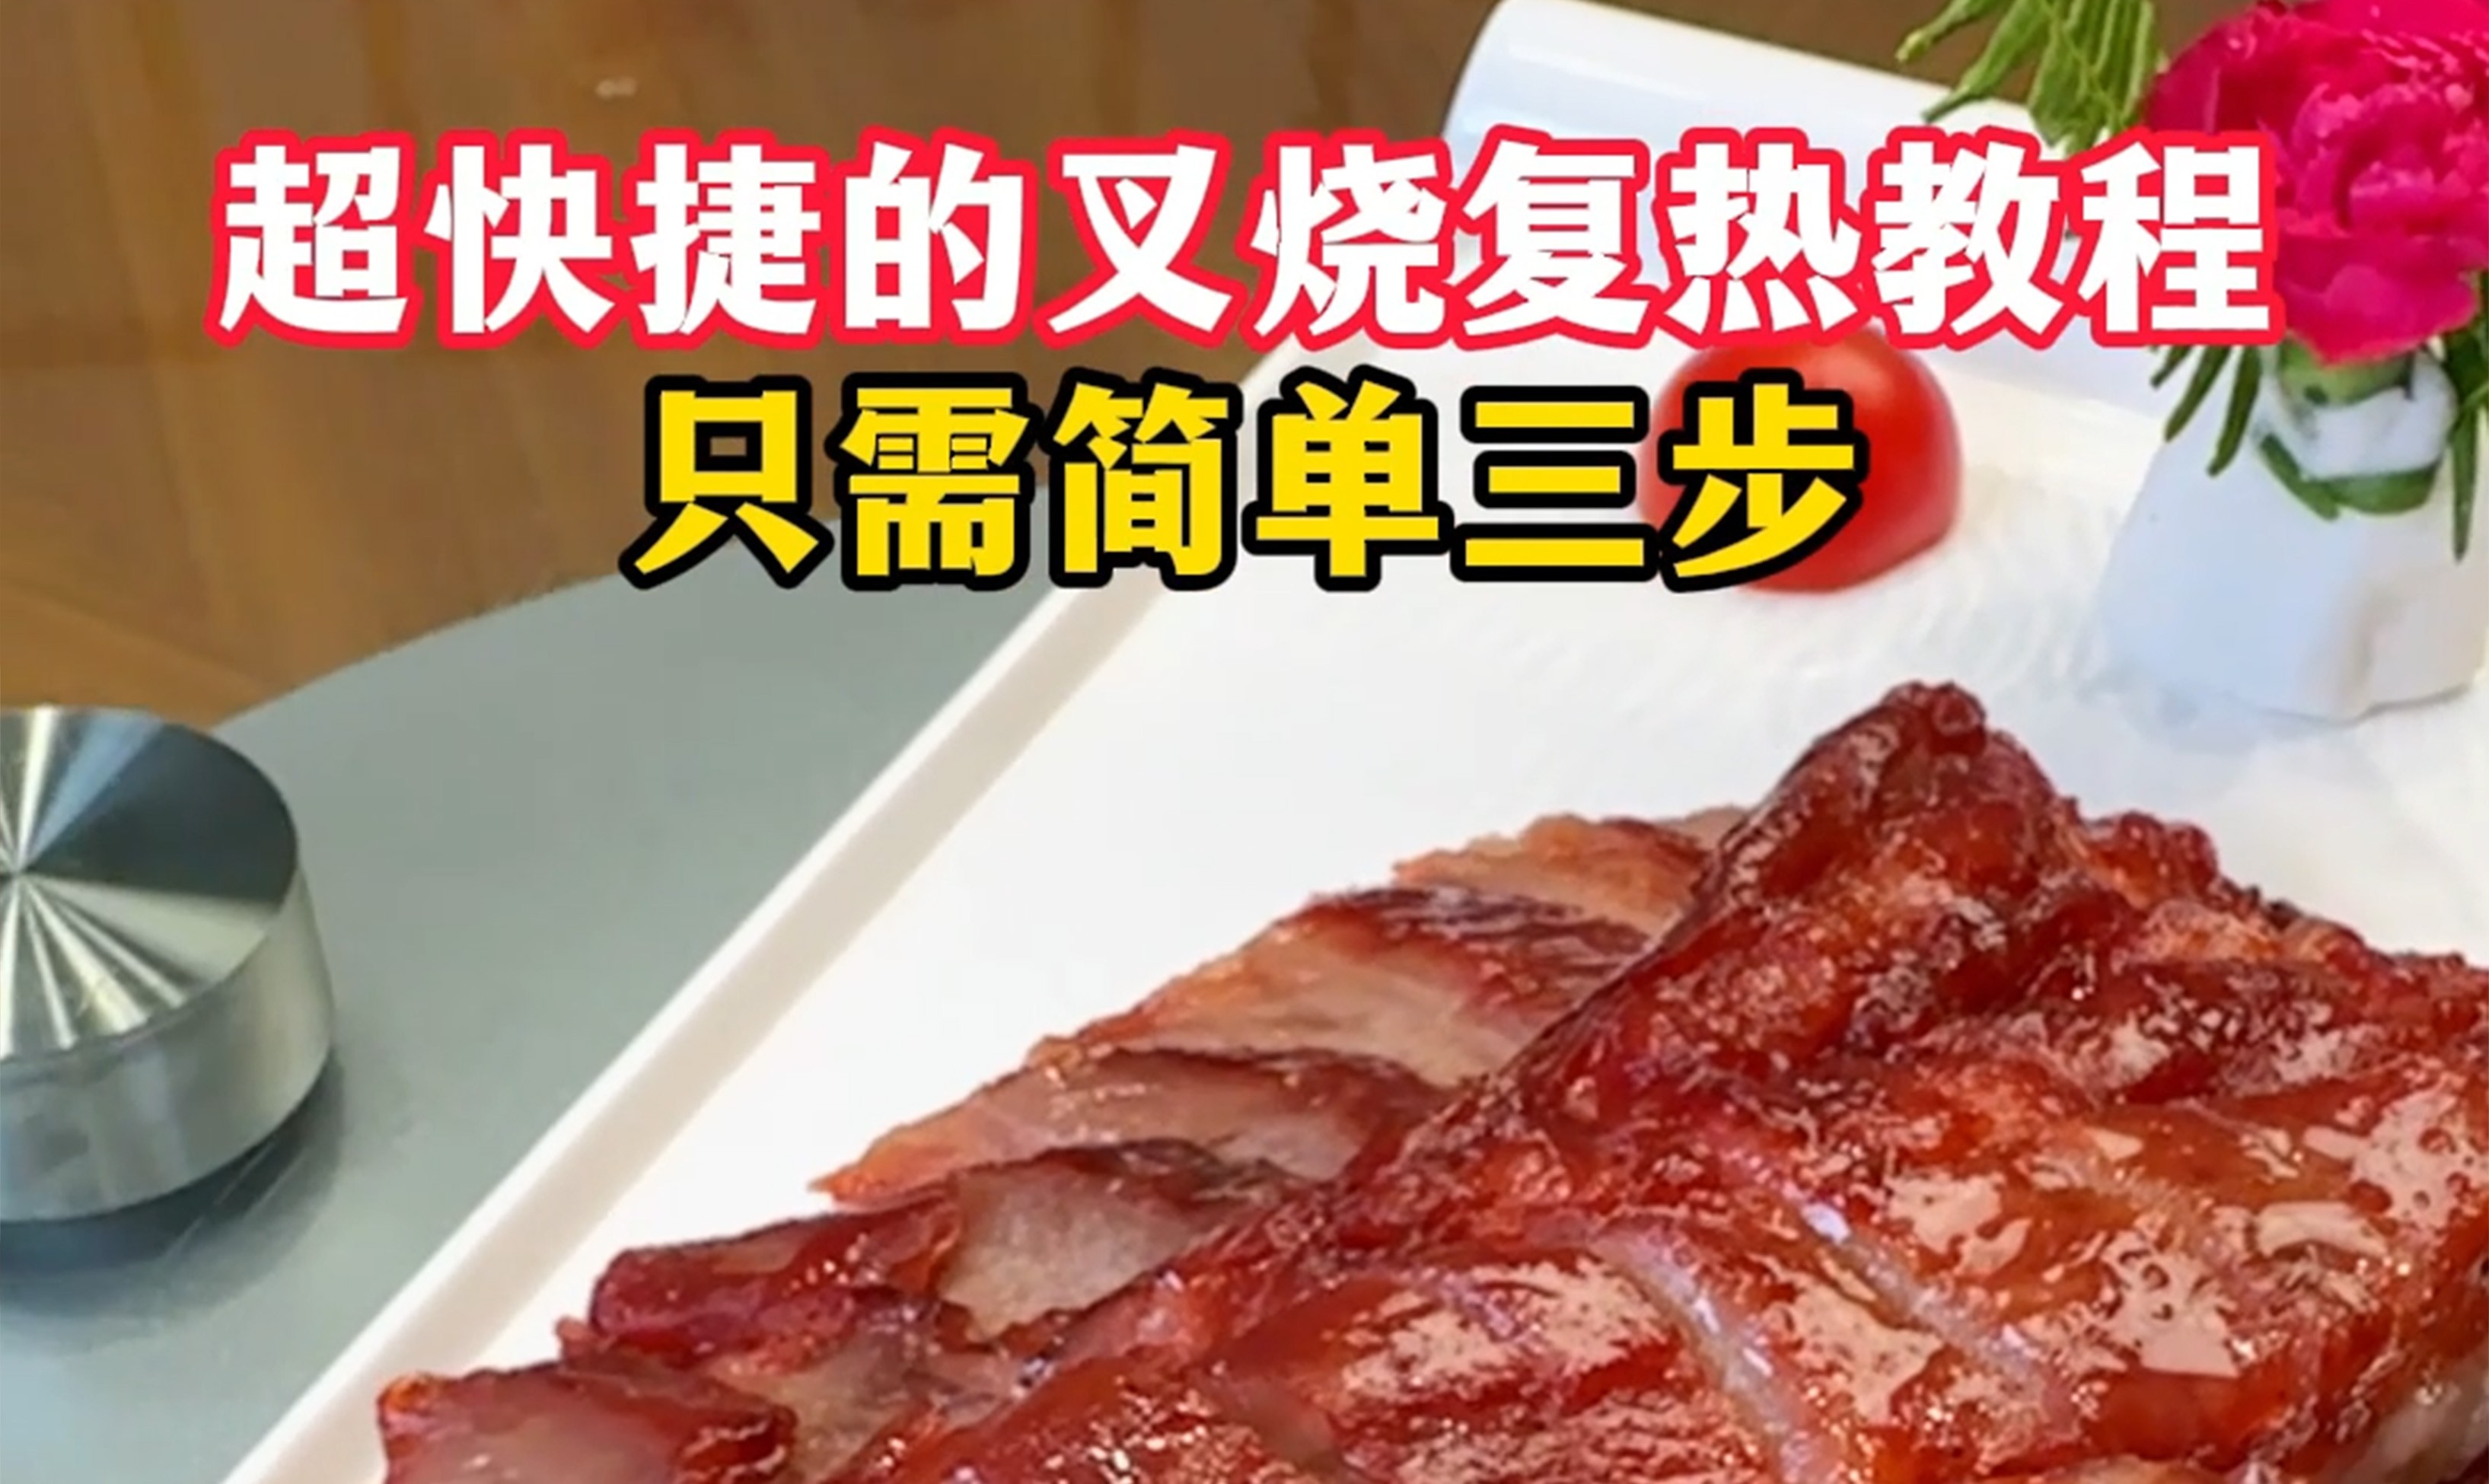 How to Reheat Barbecued Pork